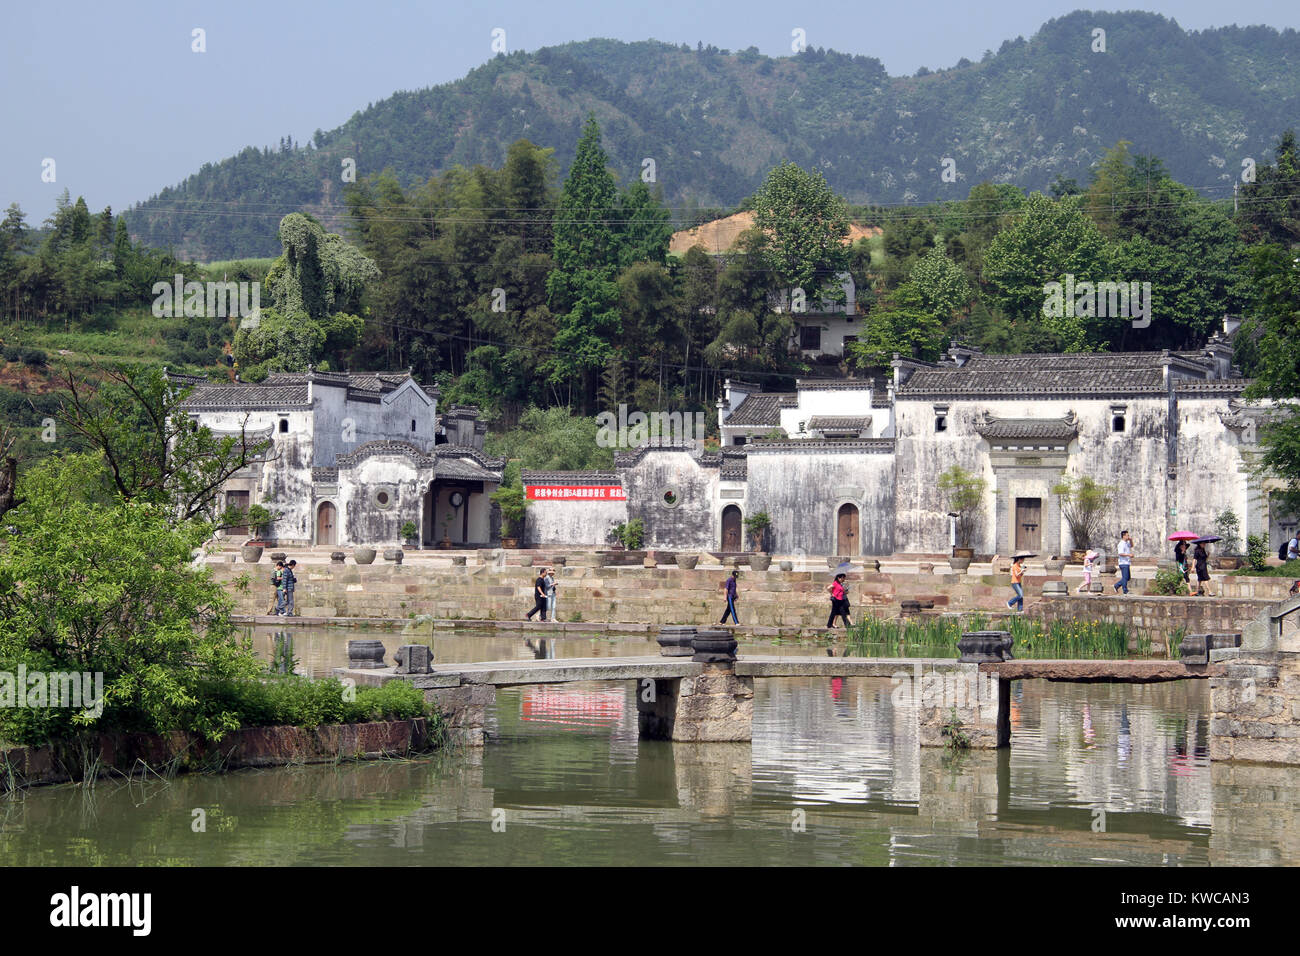 People near lake with buildings in Shexian town, China Stock Photo